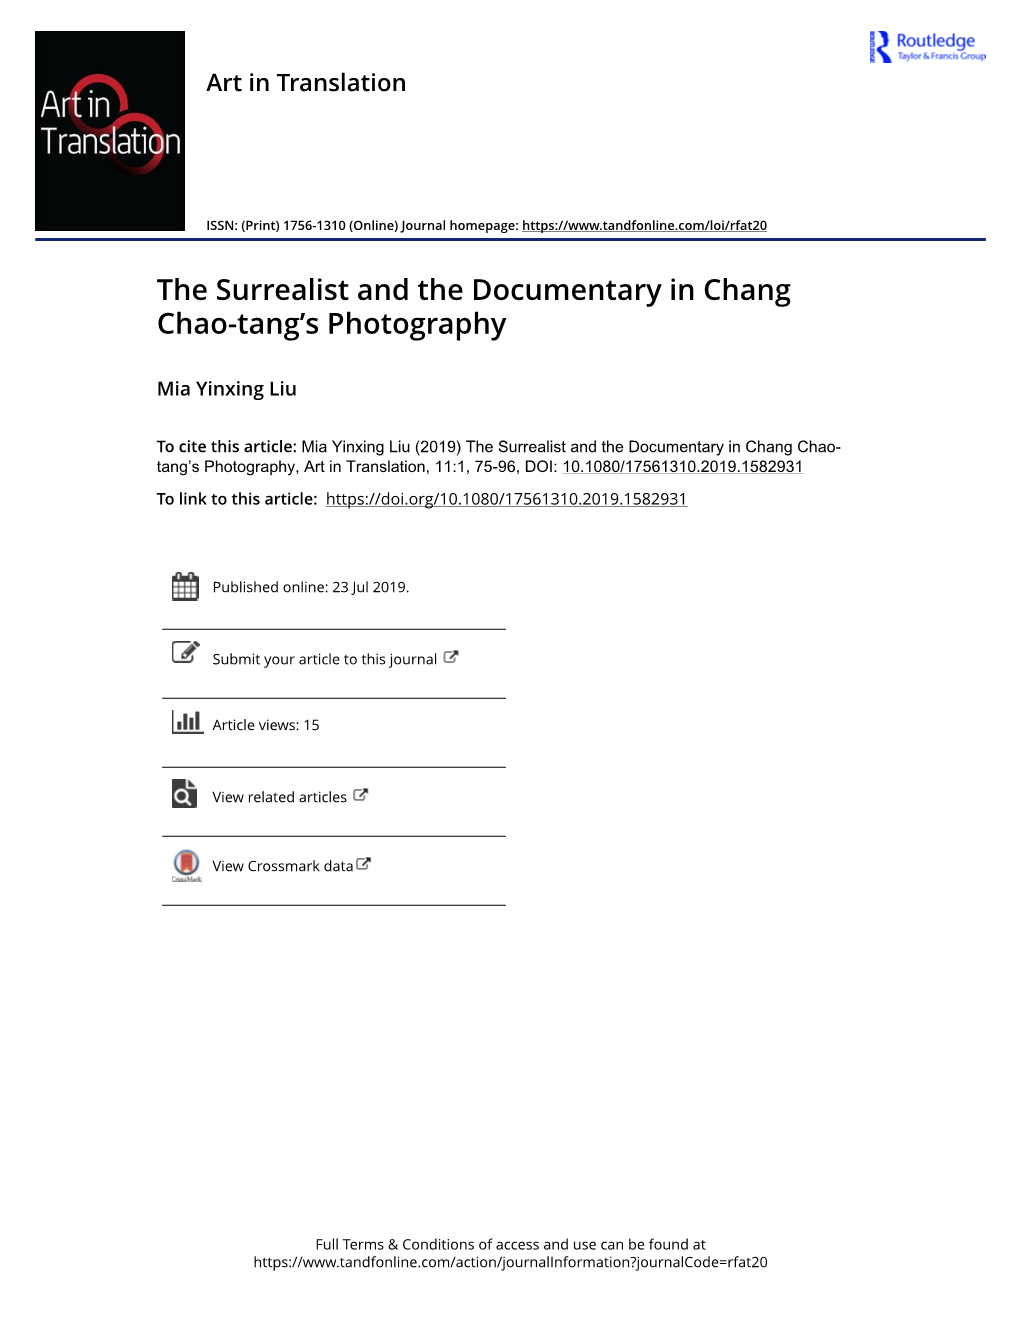 The Surrealist and the Documentary in Chang Chao-Tang's Photography